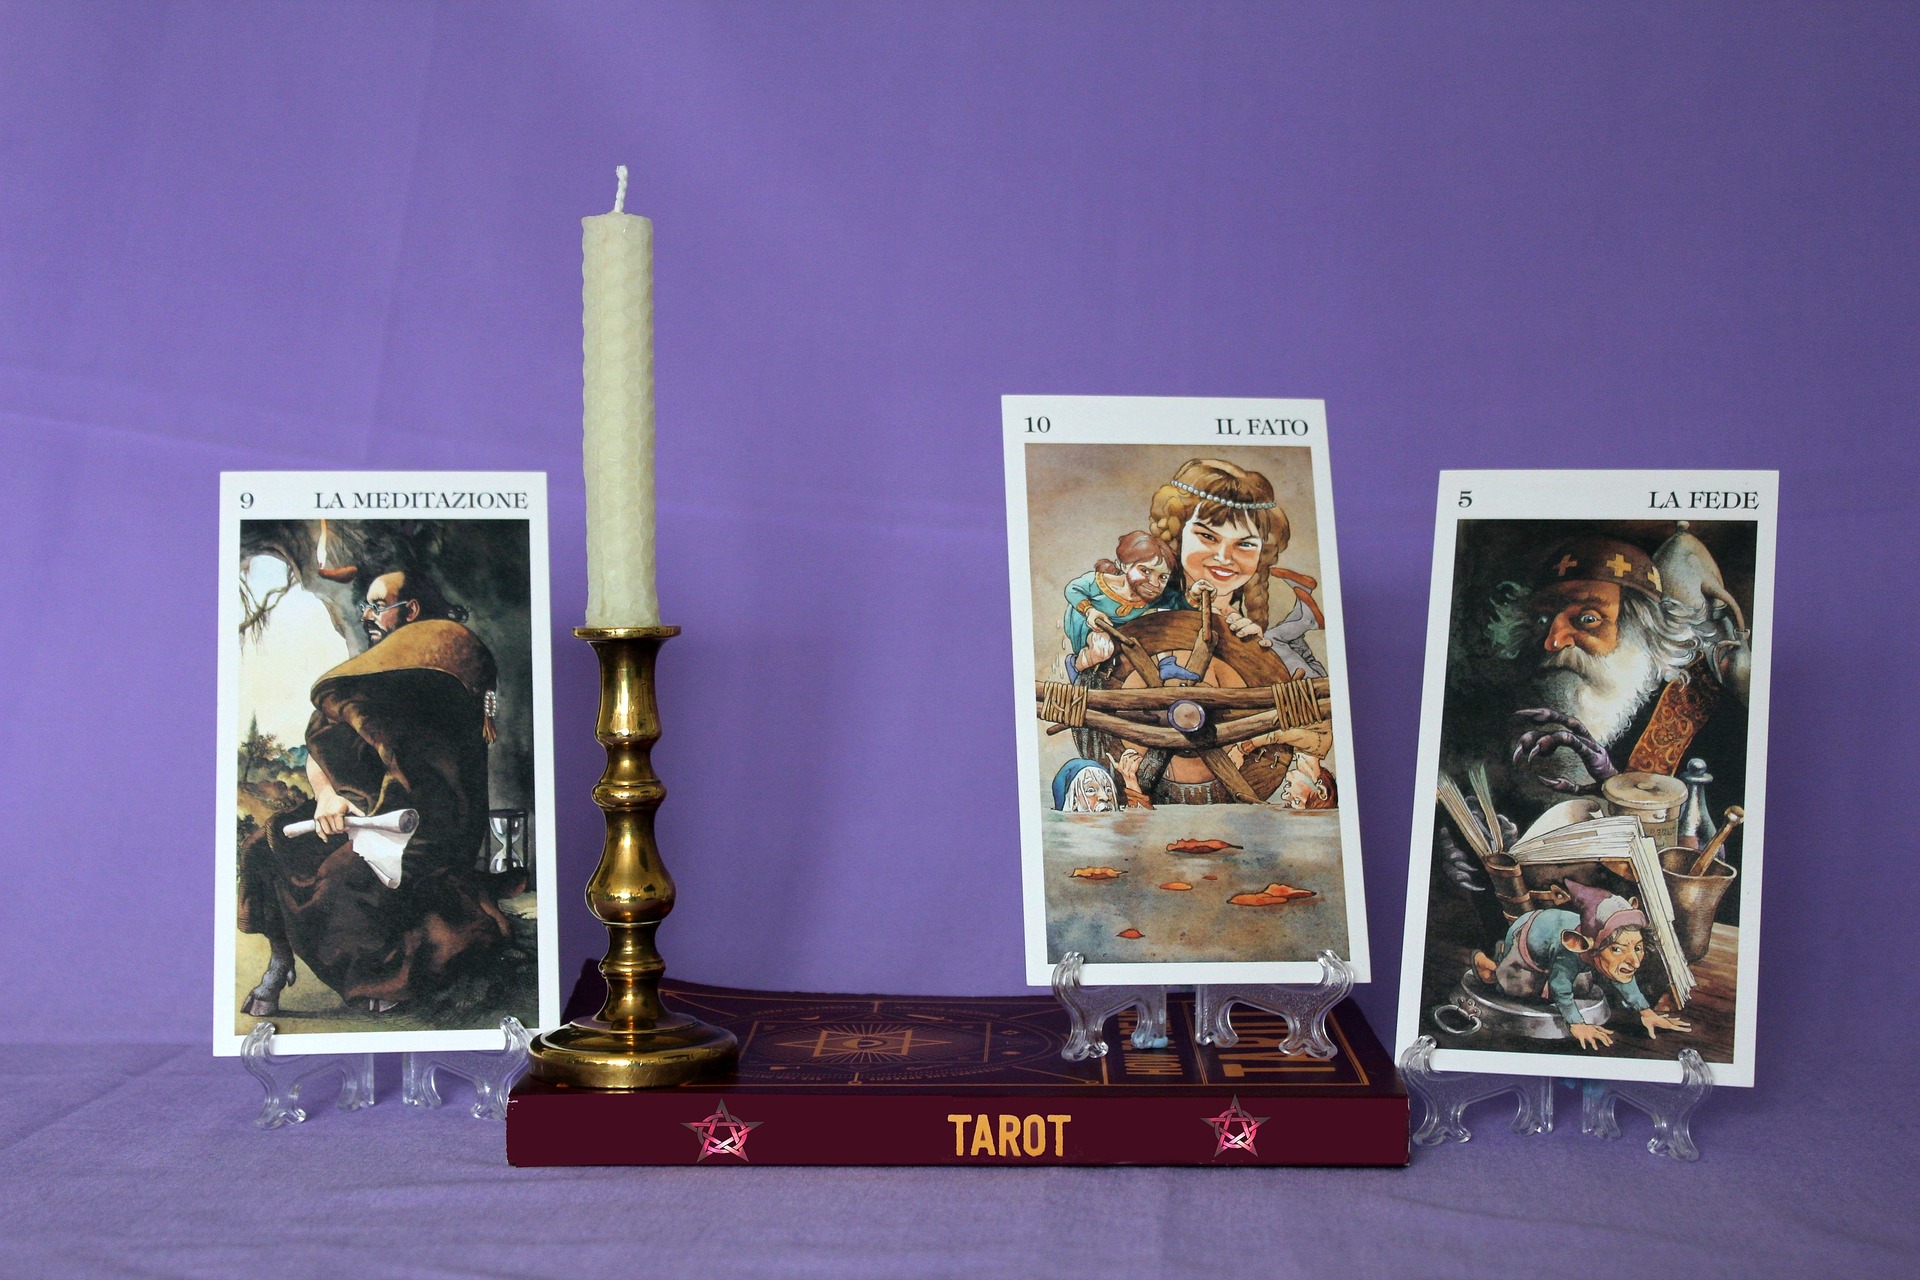 Did You Know About These Benefits Of Tarot Card Reading?